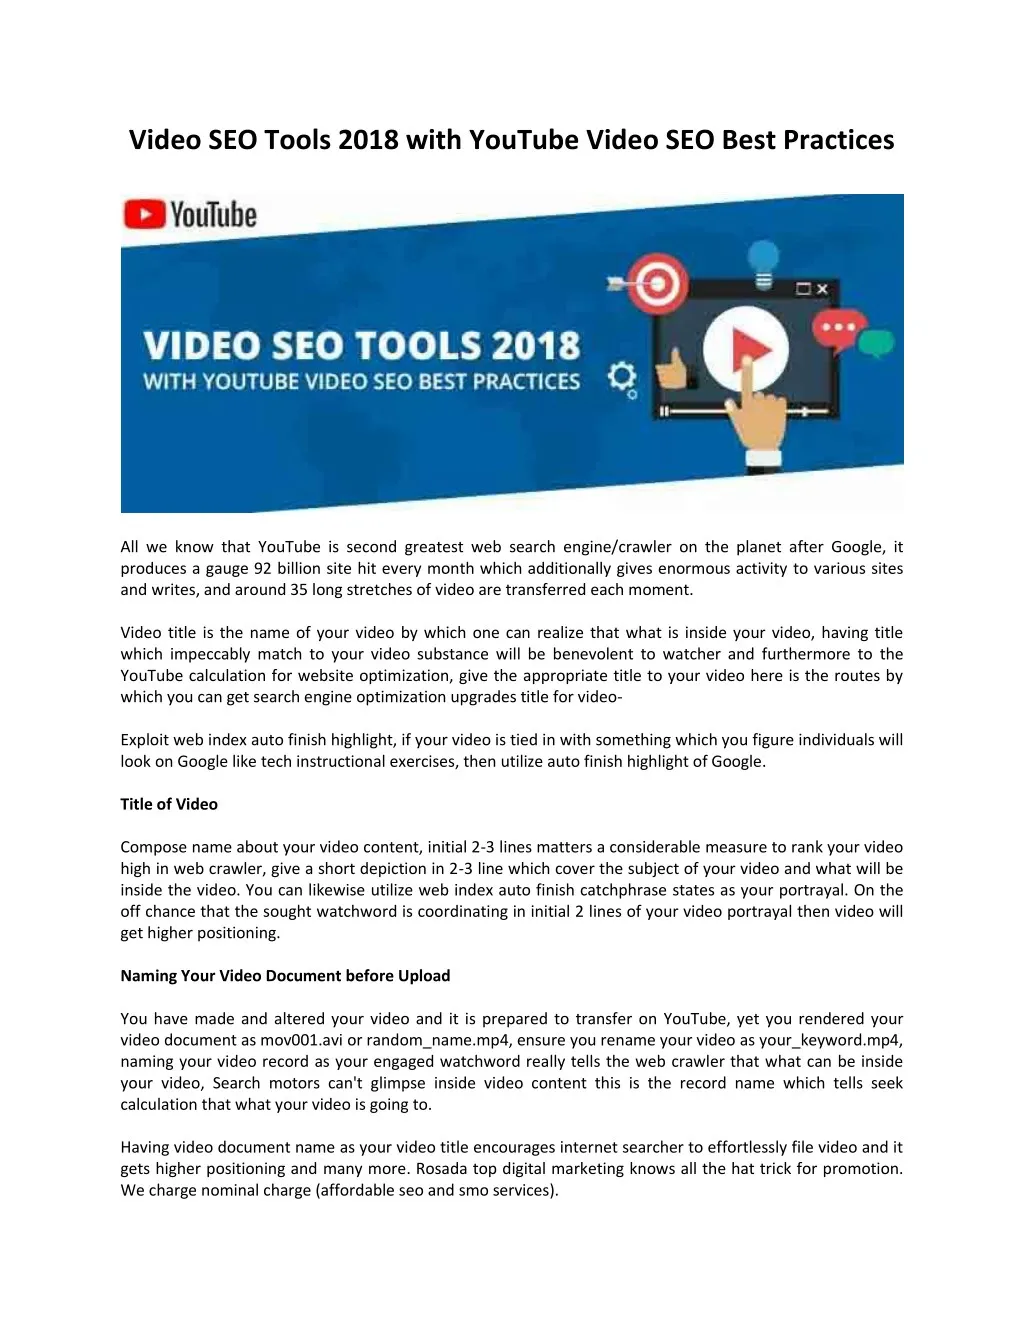 video seo tools 2018 with youtube video seo best